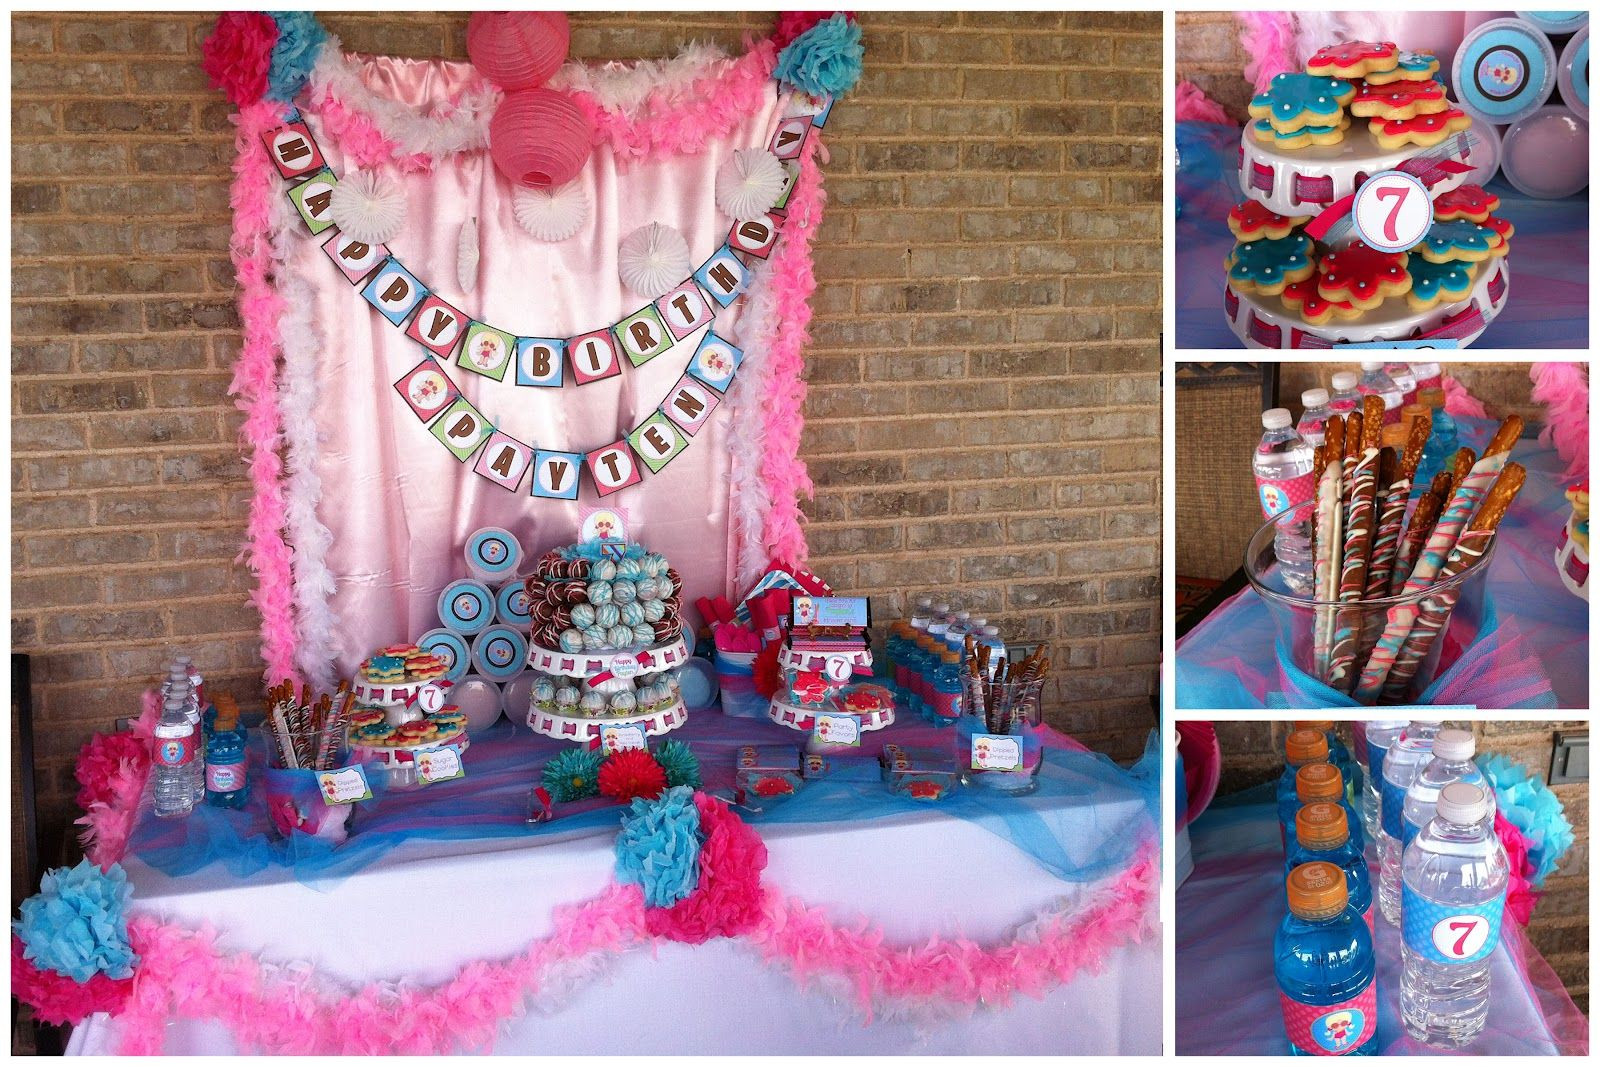 Sweet 16 Birthday Pool Party Ideas
 sweet 16 birthday party ideas girls for at home